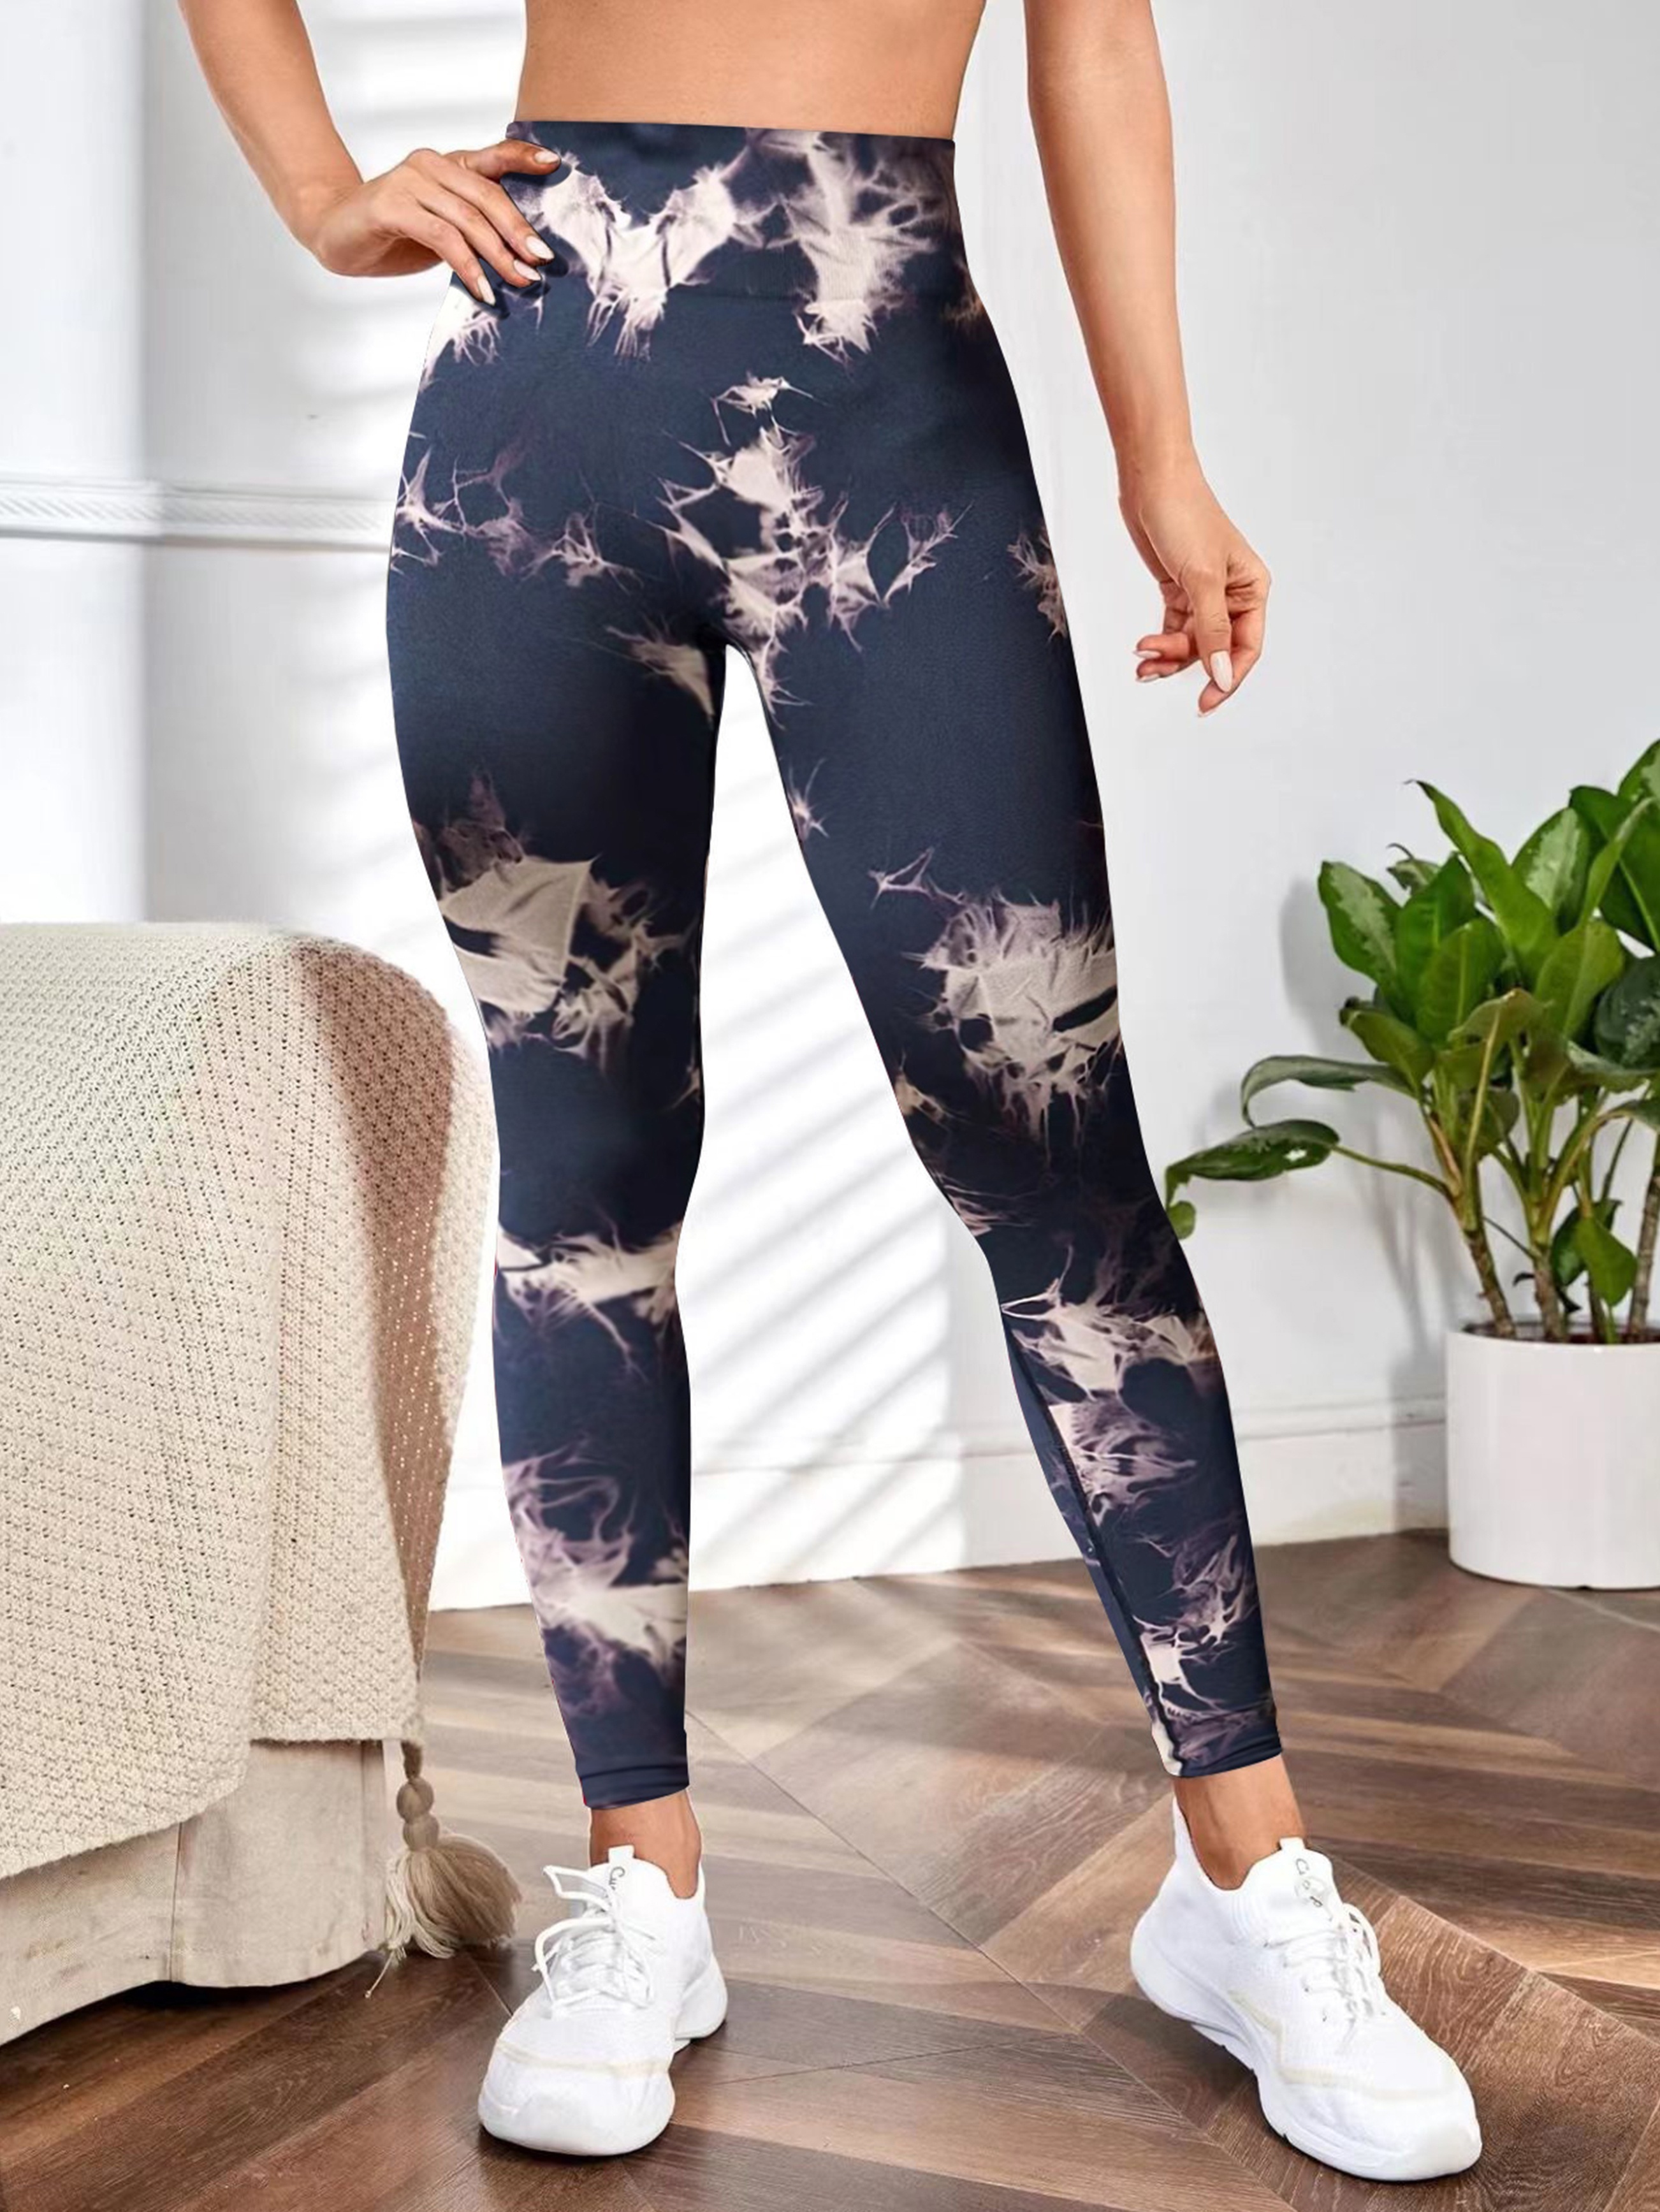 Womens Sport Skimpy Tie Dye Ripped Seamless Sporty Cutout High Waist Dressy  Leggings for Women Cute Tights Yoga Pants Black at  Women's Clothing  store